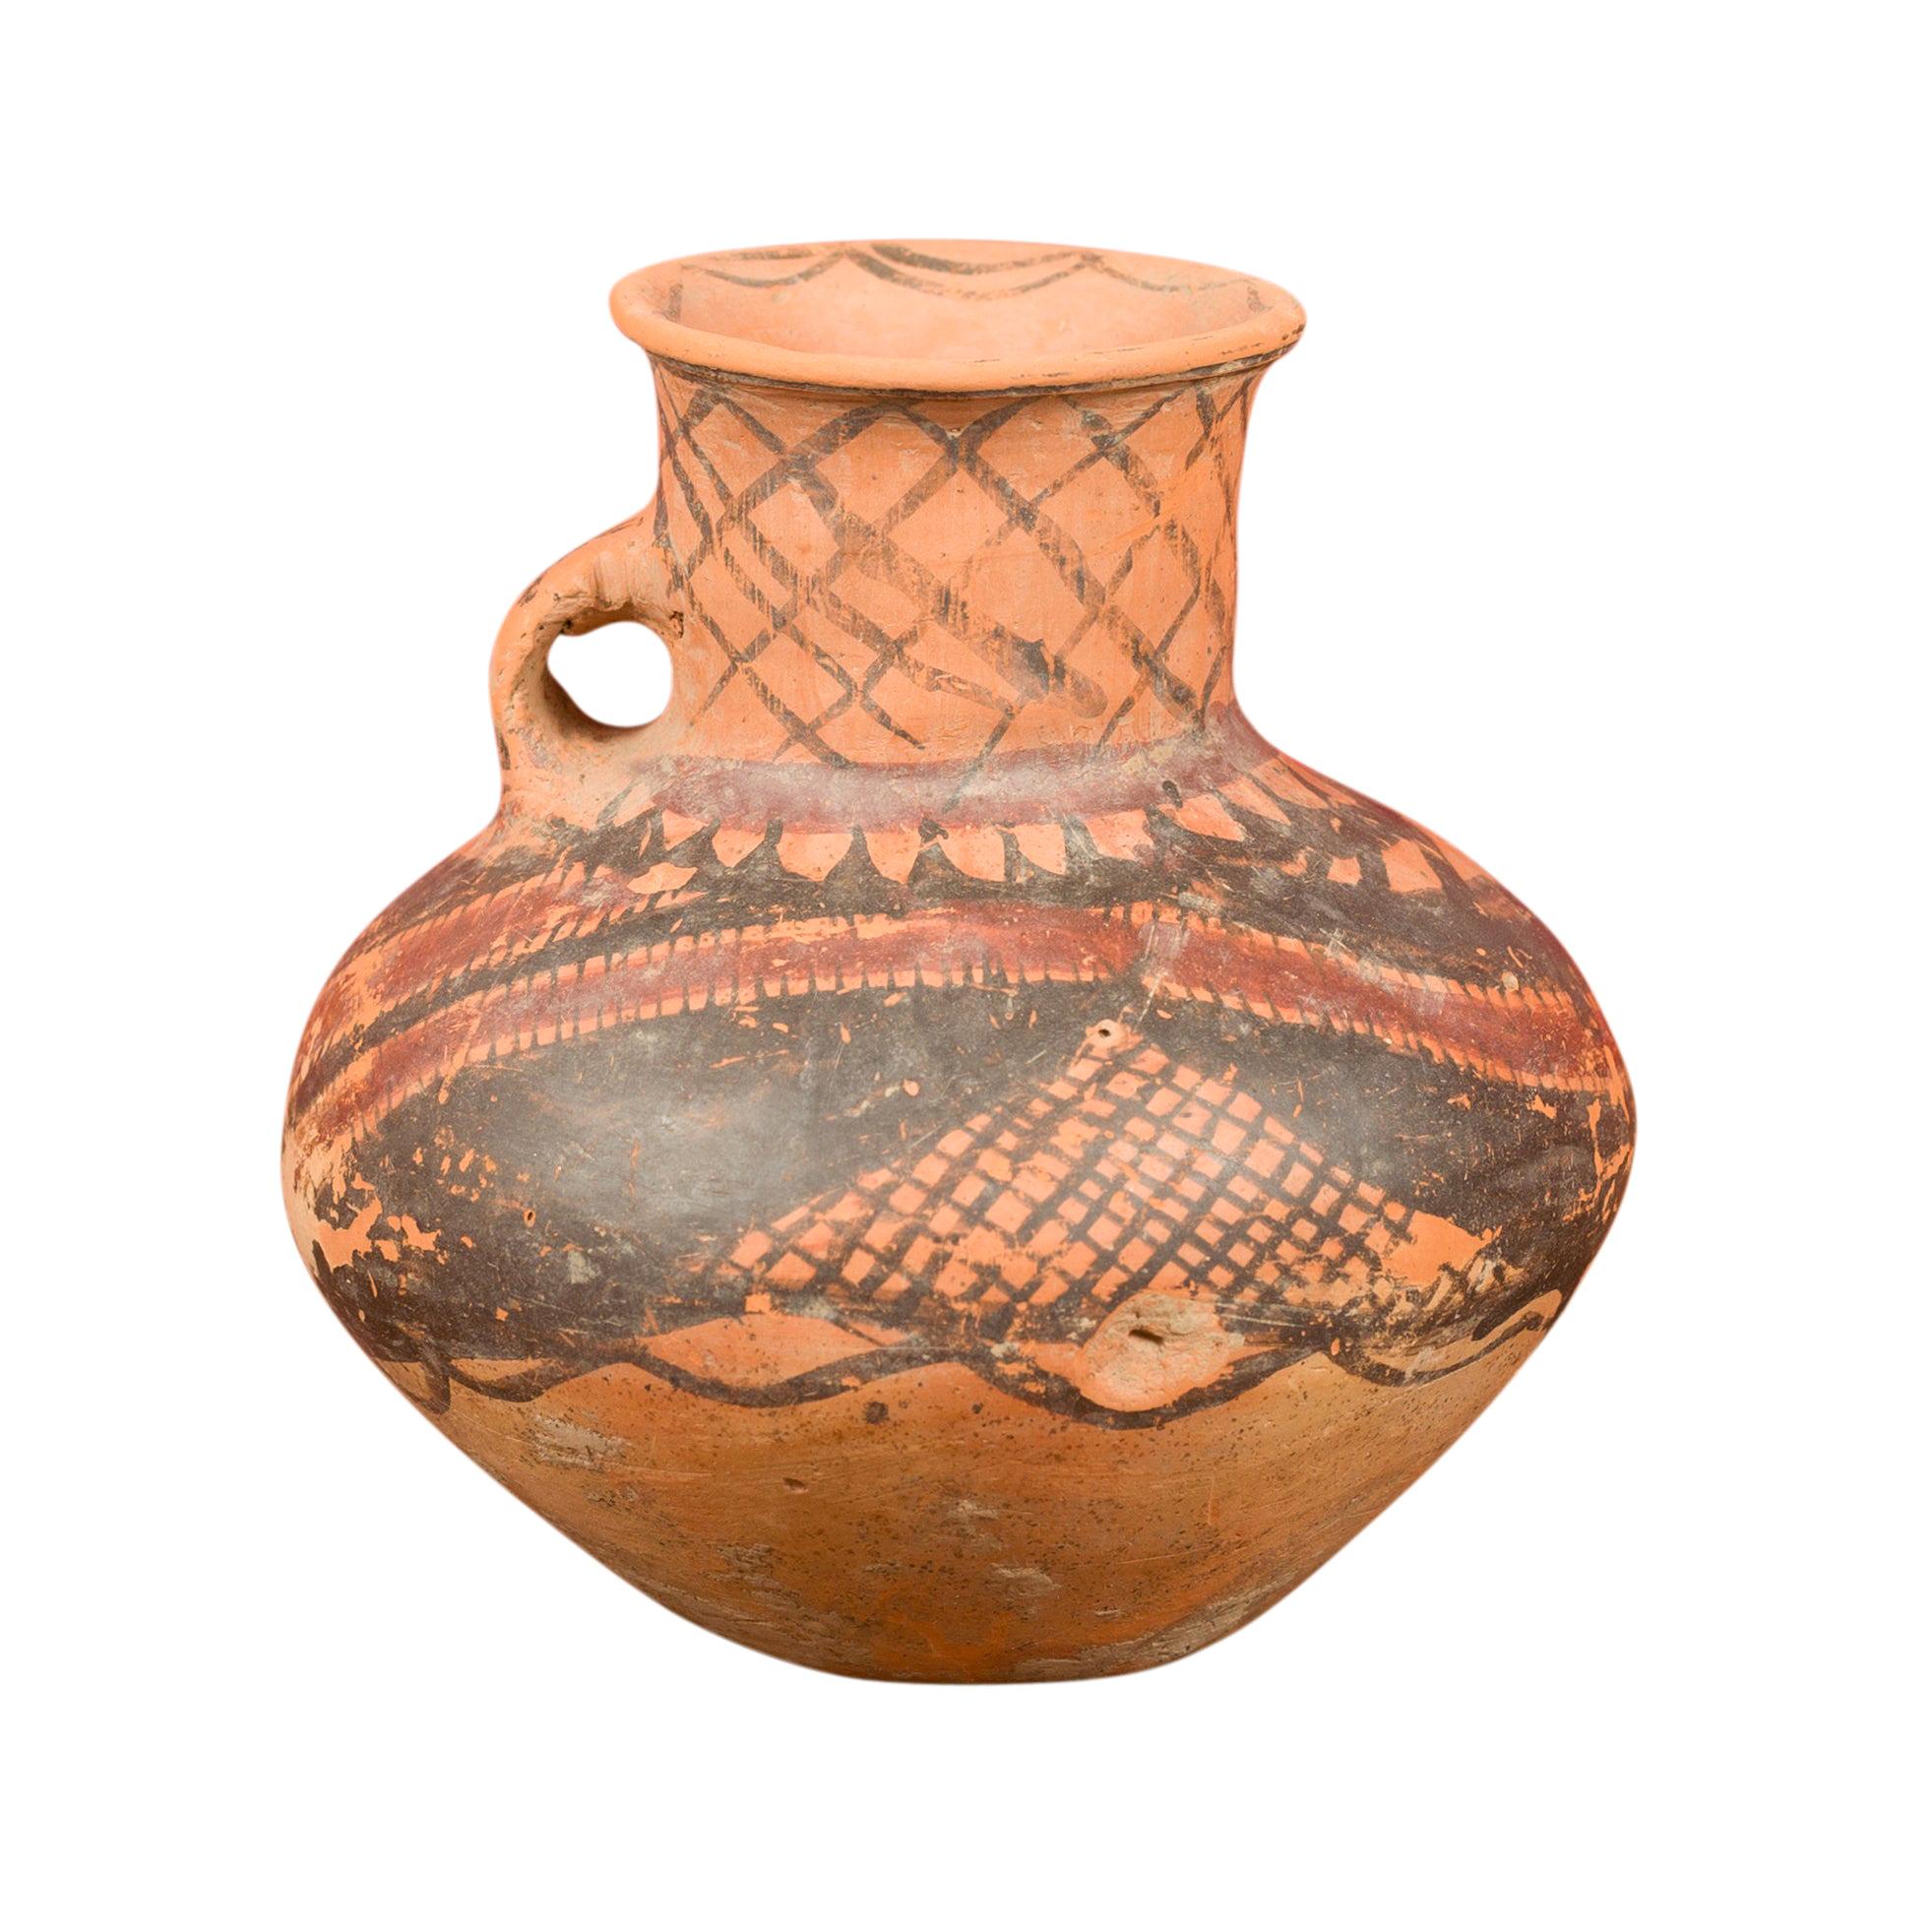 Small Neolithic Terracotta Pitcher with Geometric Decor and Lateral Handle